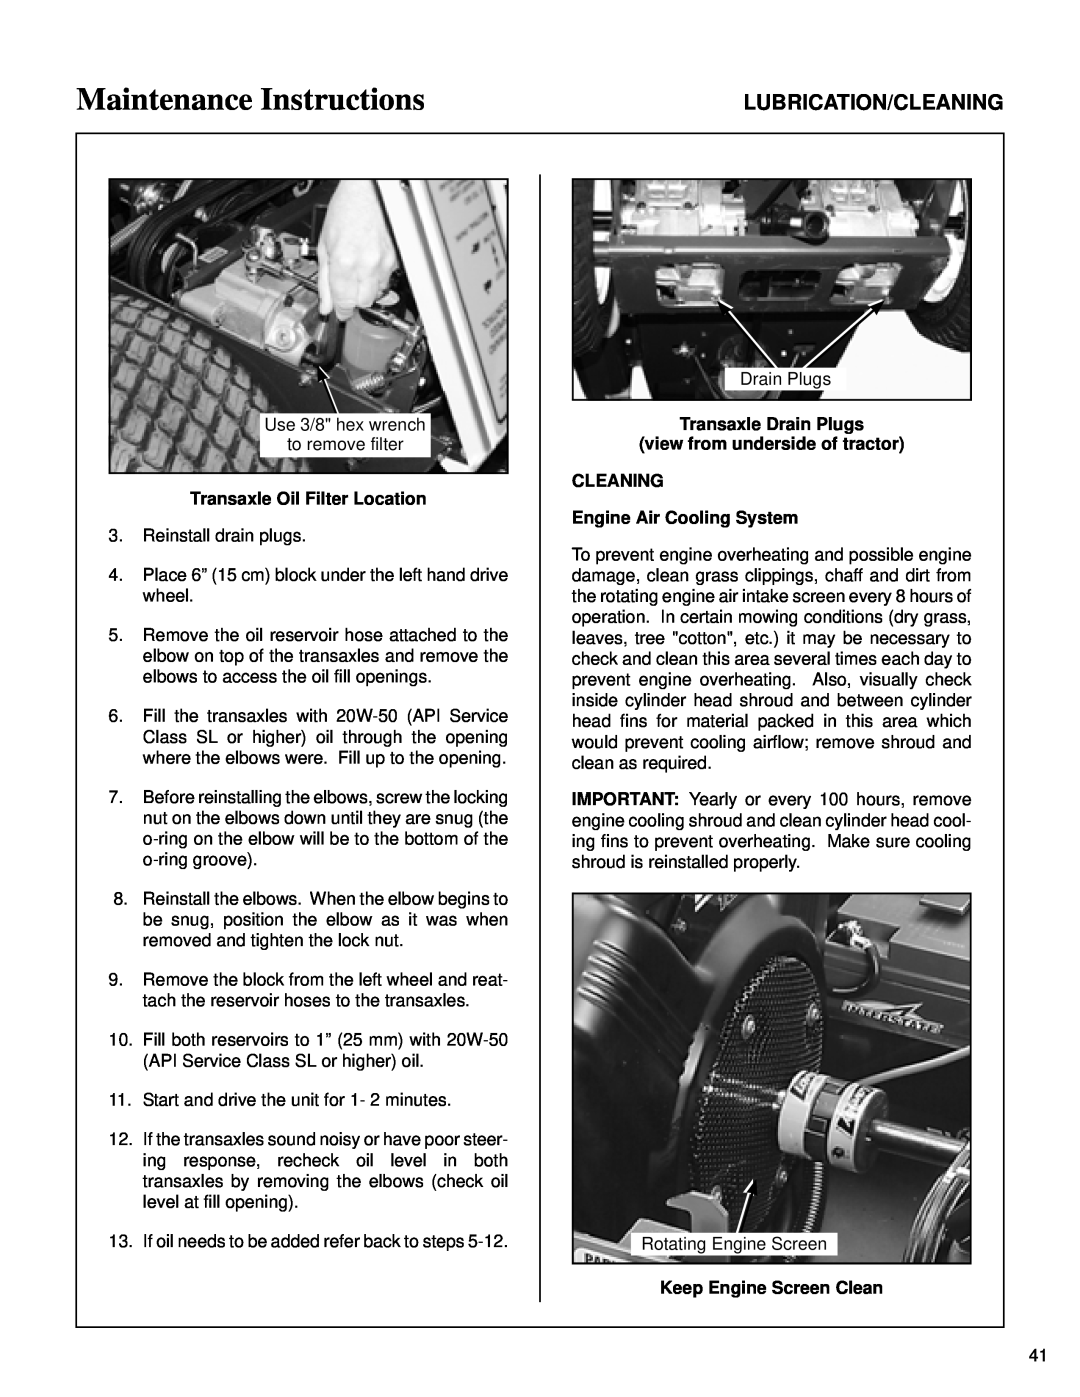 Briggs & Stratton MB (18 HP) owner manual Lubrication/Cleaning, Maintenance Instructions, Transaxle Oil Filter Location 